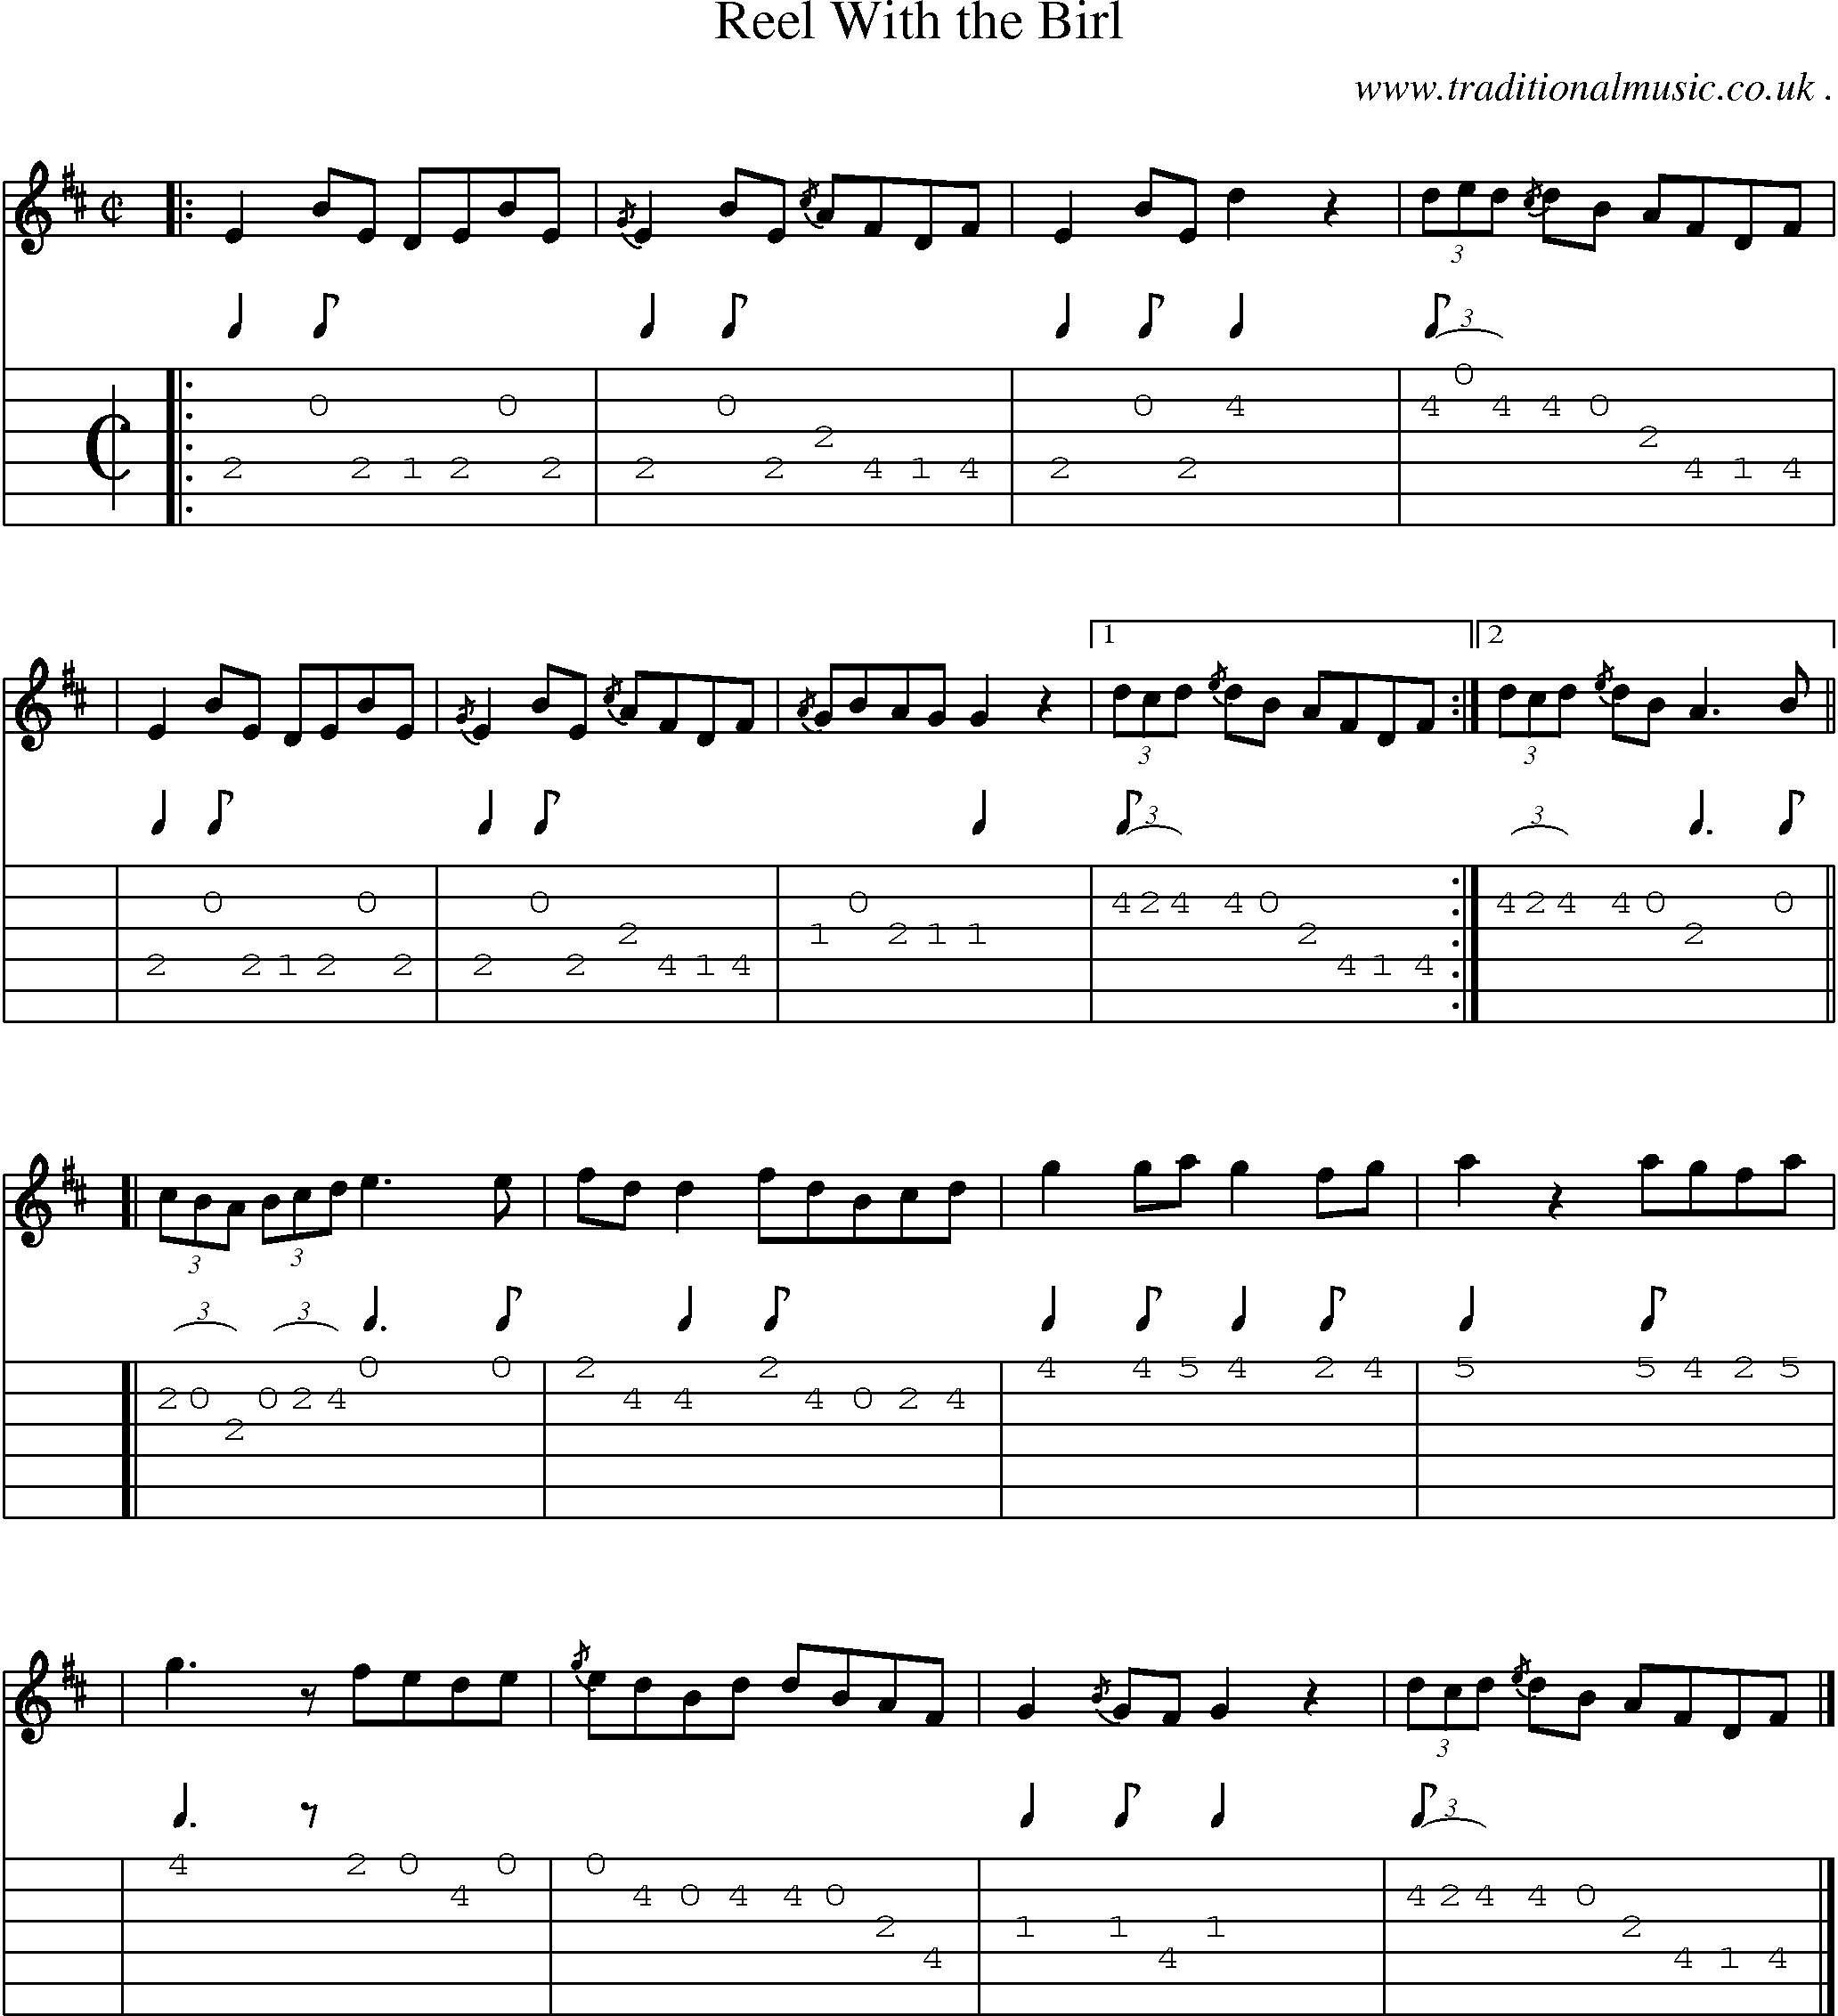 Sheet-music  score, Chords and Guitar Tabs for Reel With The Birl